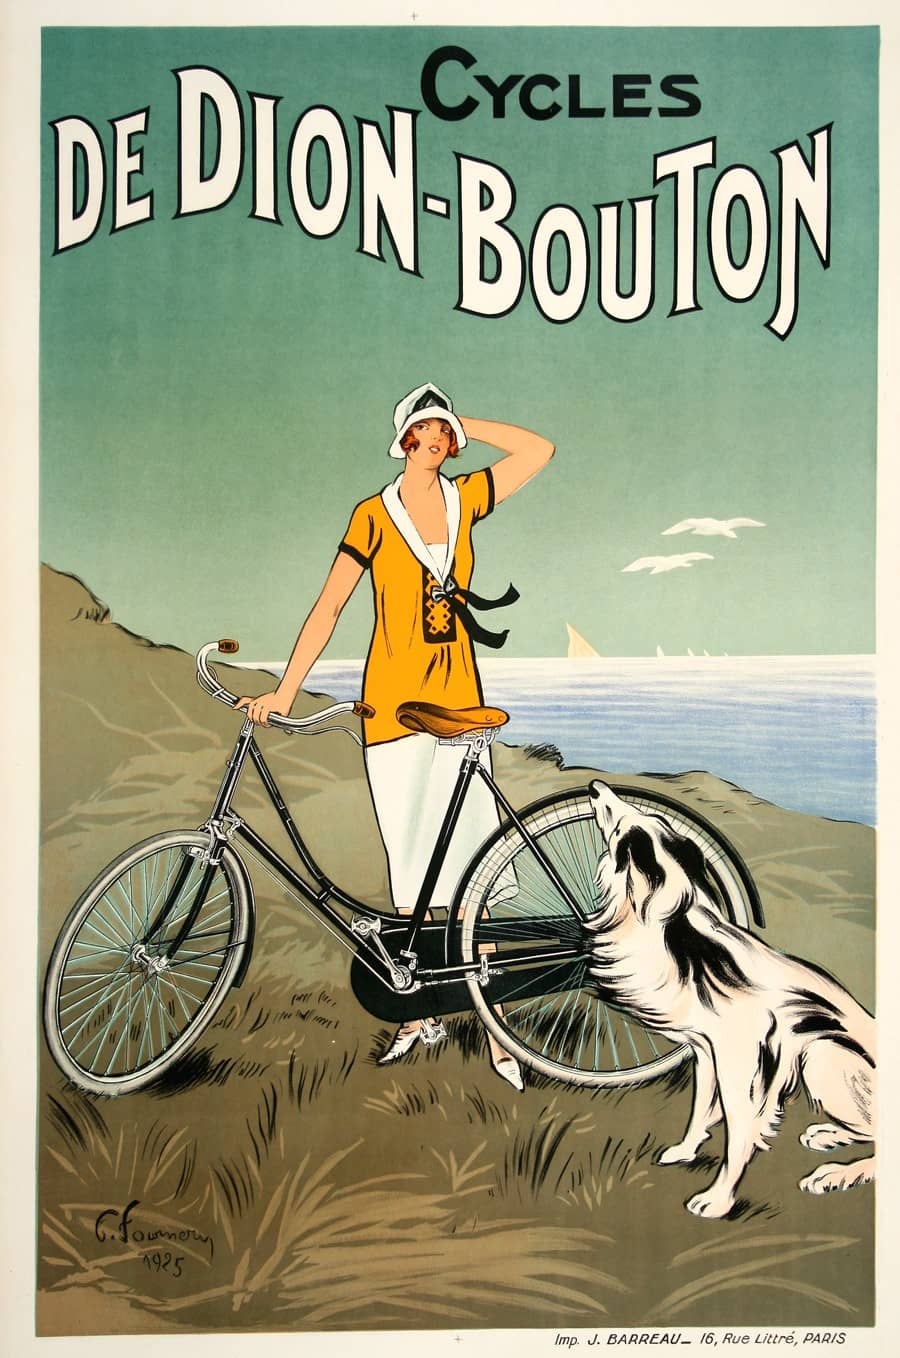 Original French Bicycle Poster 1925 De Dion Bouton by Fournery Art Deco